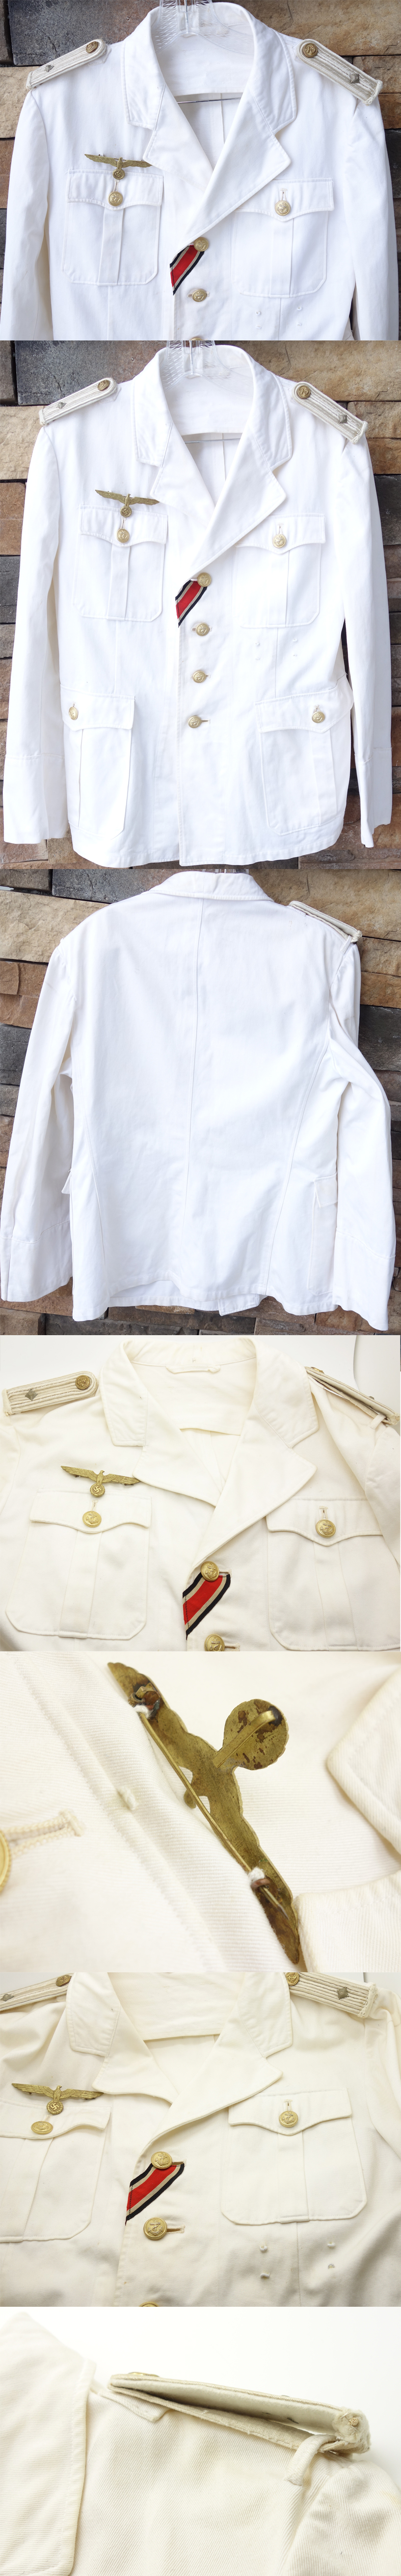 Oberleutnaunt's Navy White Tropical Tunic